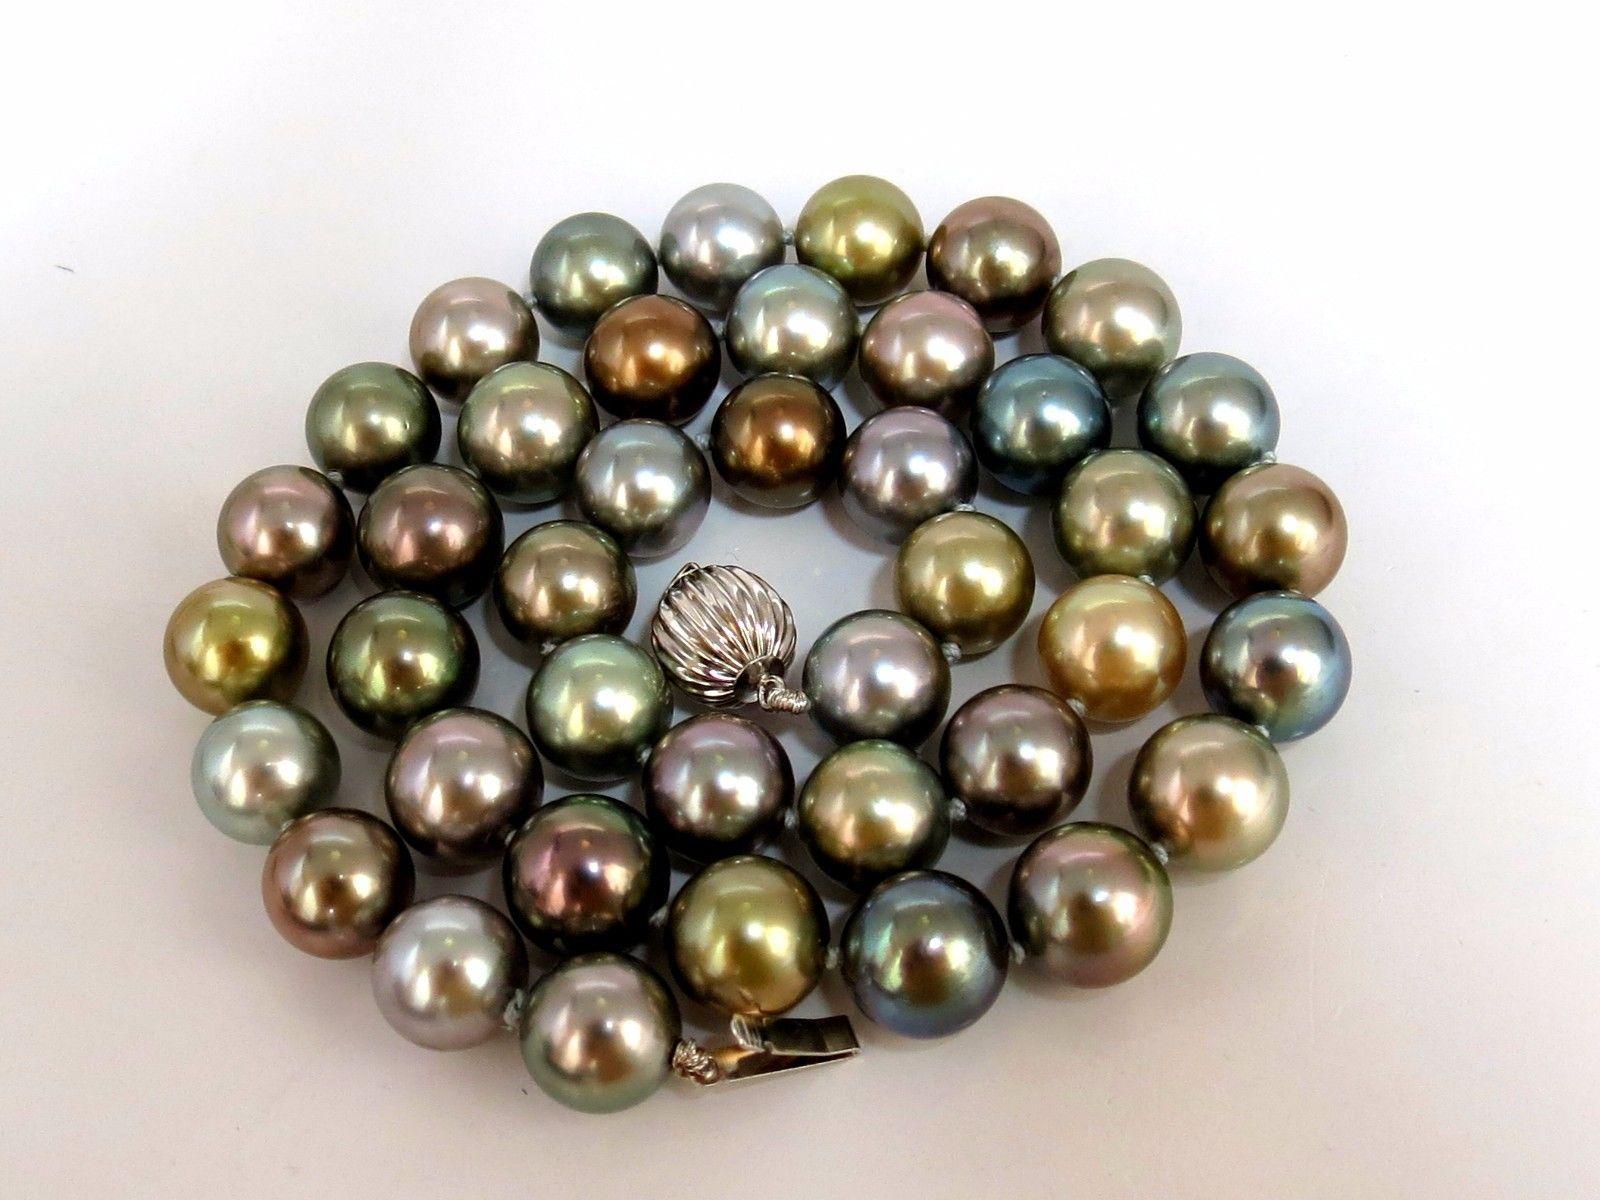 10.1-10.8MM Natural Tahitian Multi color pearls necklace.

Prime Luster & Excellent Saturation

41 pearls

Strung with ball clasp.

14Kt white gold.

18 inches

Grand Total 64 grams

Appraisal will accompany for: $12,000